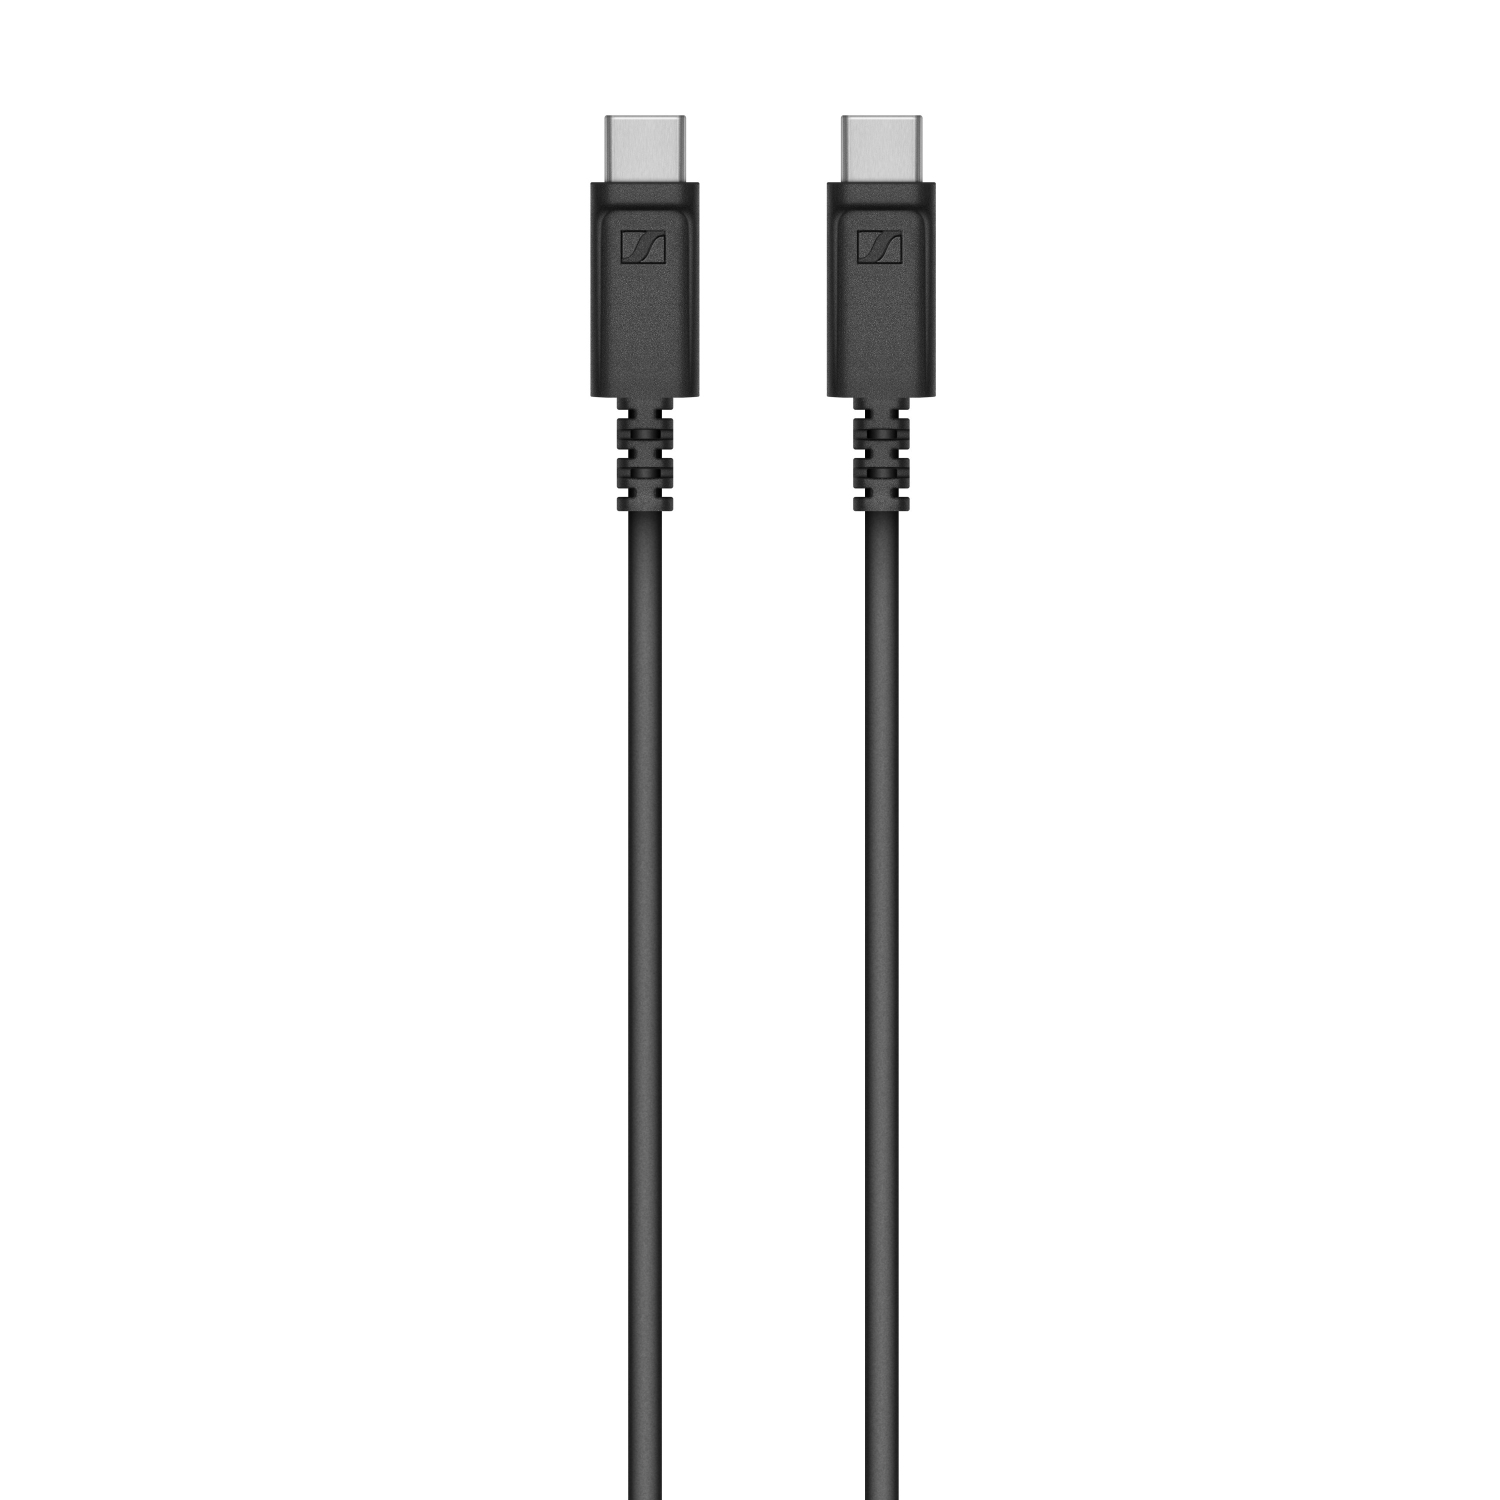 Sennheiser Profile USB Microphone with Table Stand and USB-C Cable